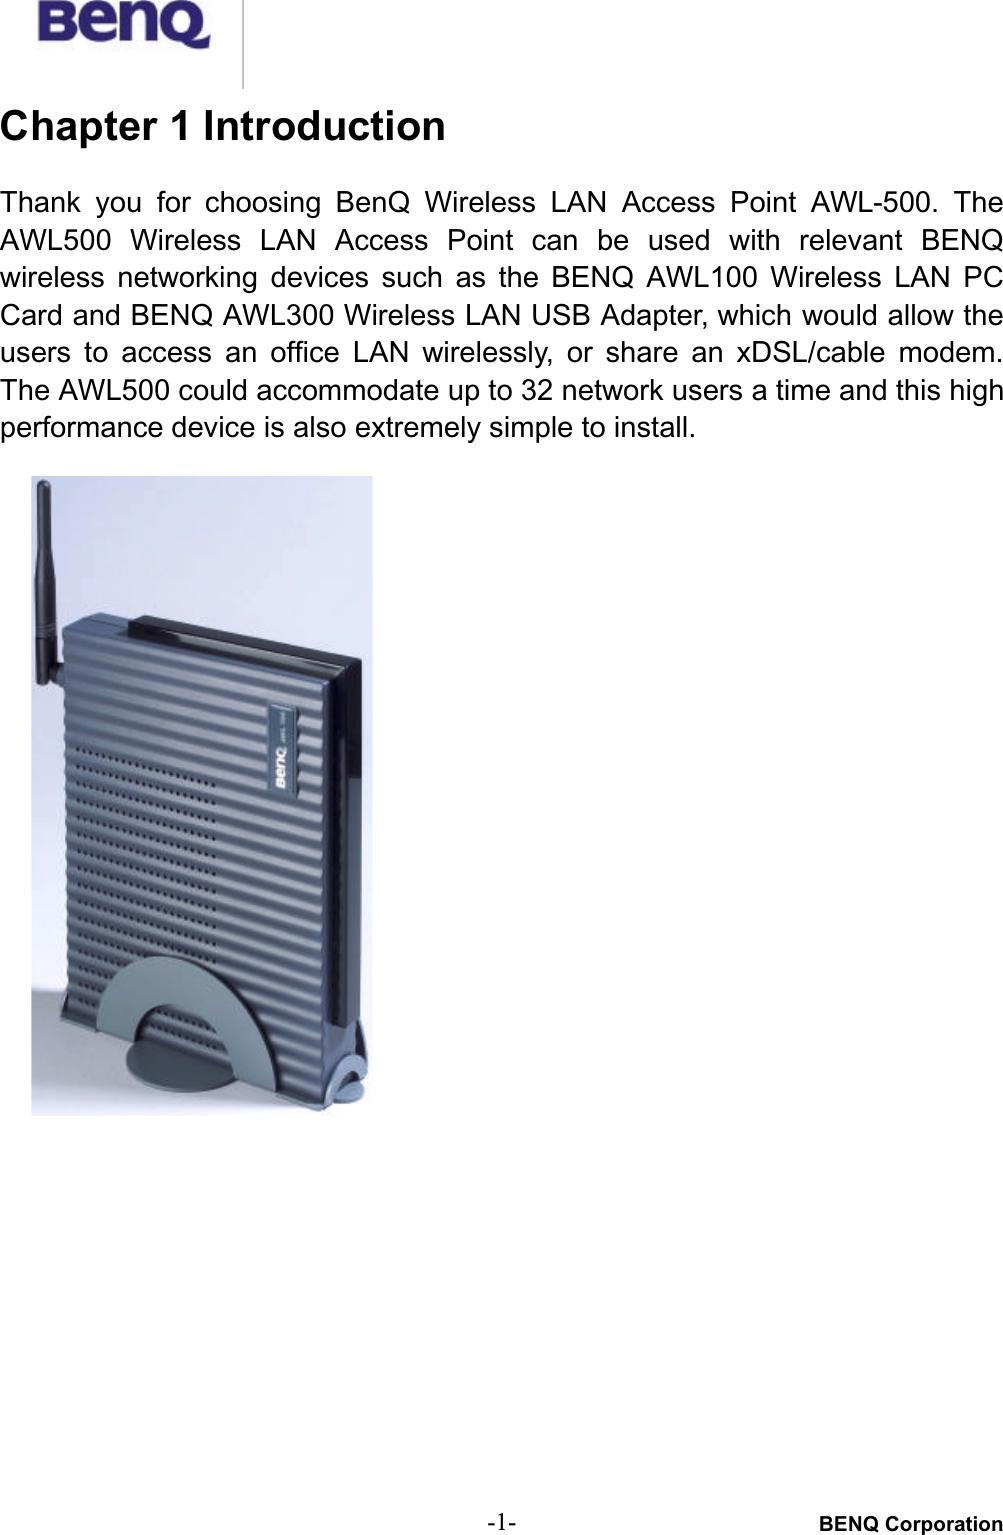 BENQ Corporation-1-Chapter 1 IntroductionThank  you  for choosing  BenQ  Wireless  LAN  Access  Point  AWL-500.  TheAWL500  Wireless  LAN  Access  Point  can  be  used  with  relevant  BENQwireless  networking  devices  such  as  the  BENQ  AWL100  Wireless  LAN  PCCard and BENQ AWL300 Wireless LAN USB Adapter, which would allow theusers to access  an  office  LAN wirelessly,  or  share  an  xDSL/cable  modem.The AWL500 could accommodate up to 32 network users a time and this highperformance device is also extremely simple to install.